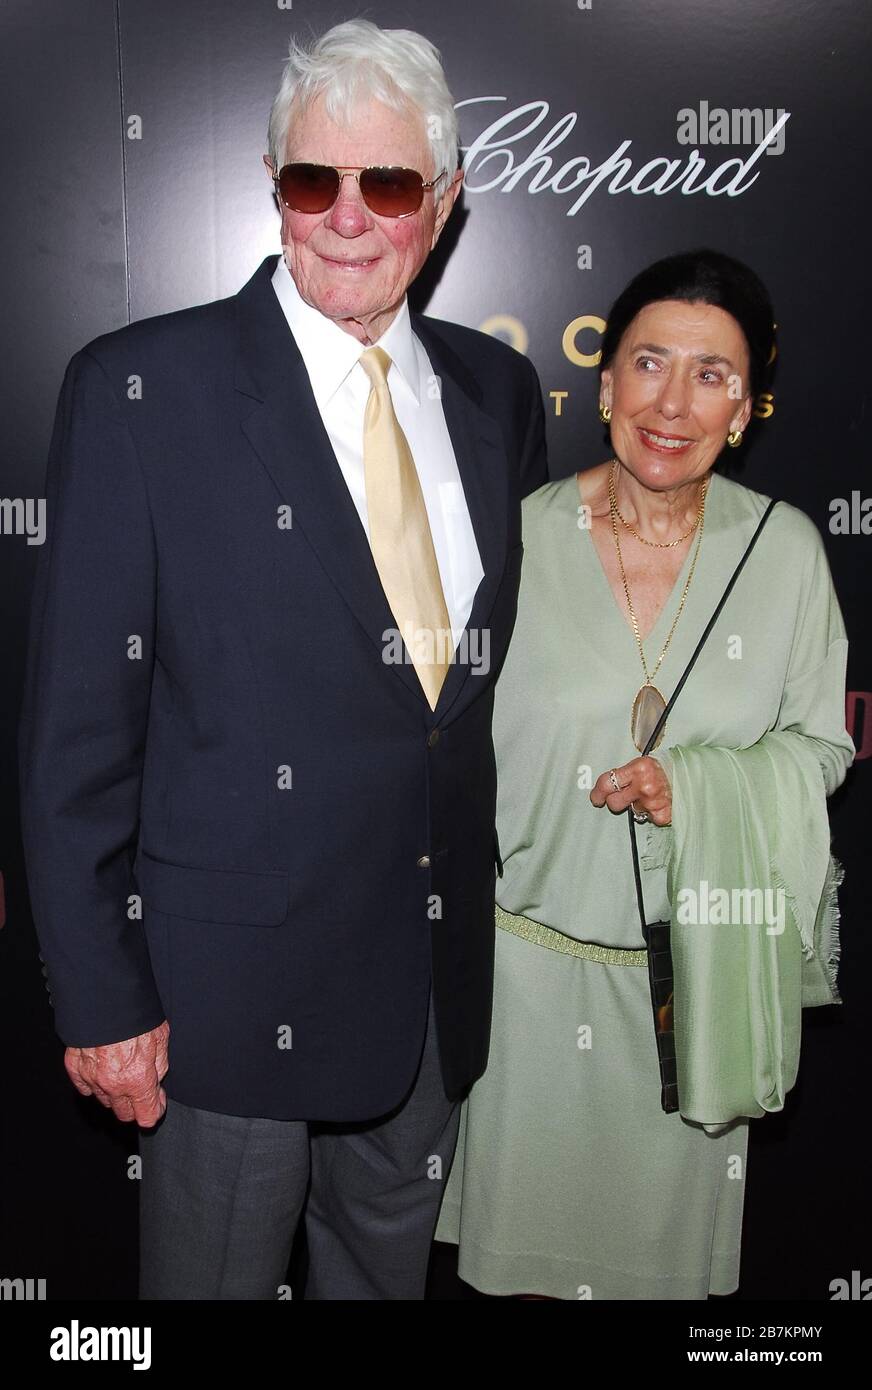 Peter Graves and Wife Joan at the Los Angeles Premiere of 'Hollywoodland' held at the Academy of Motion Picture Arts and Sciences in Beverly Hills, CA. The event took place on Thursday, September 7, 2006.  Photo by: SBM / PictureLux - File Reference # 33984-6850SBMPLX Stock Photo